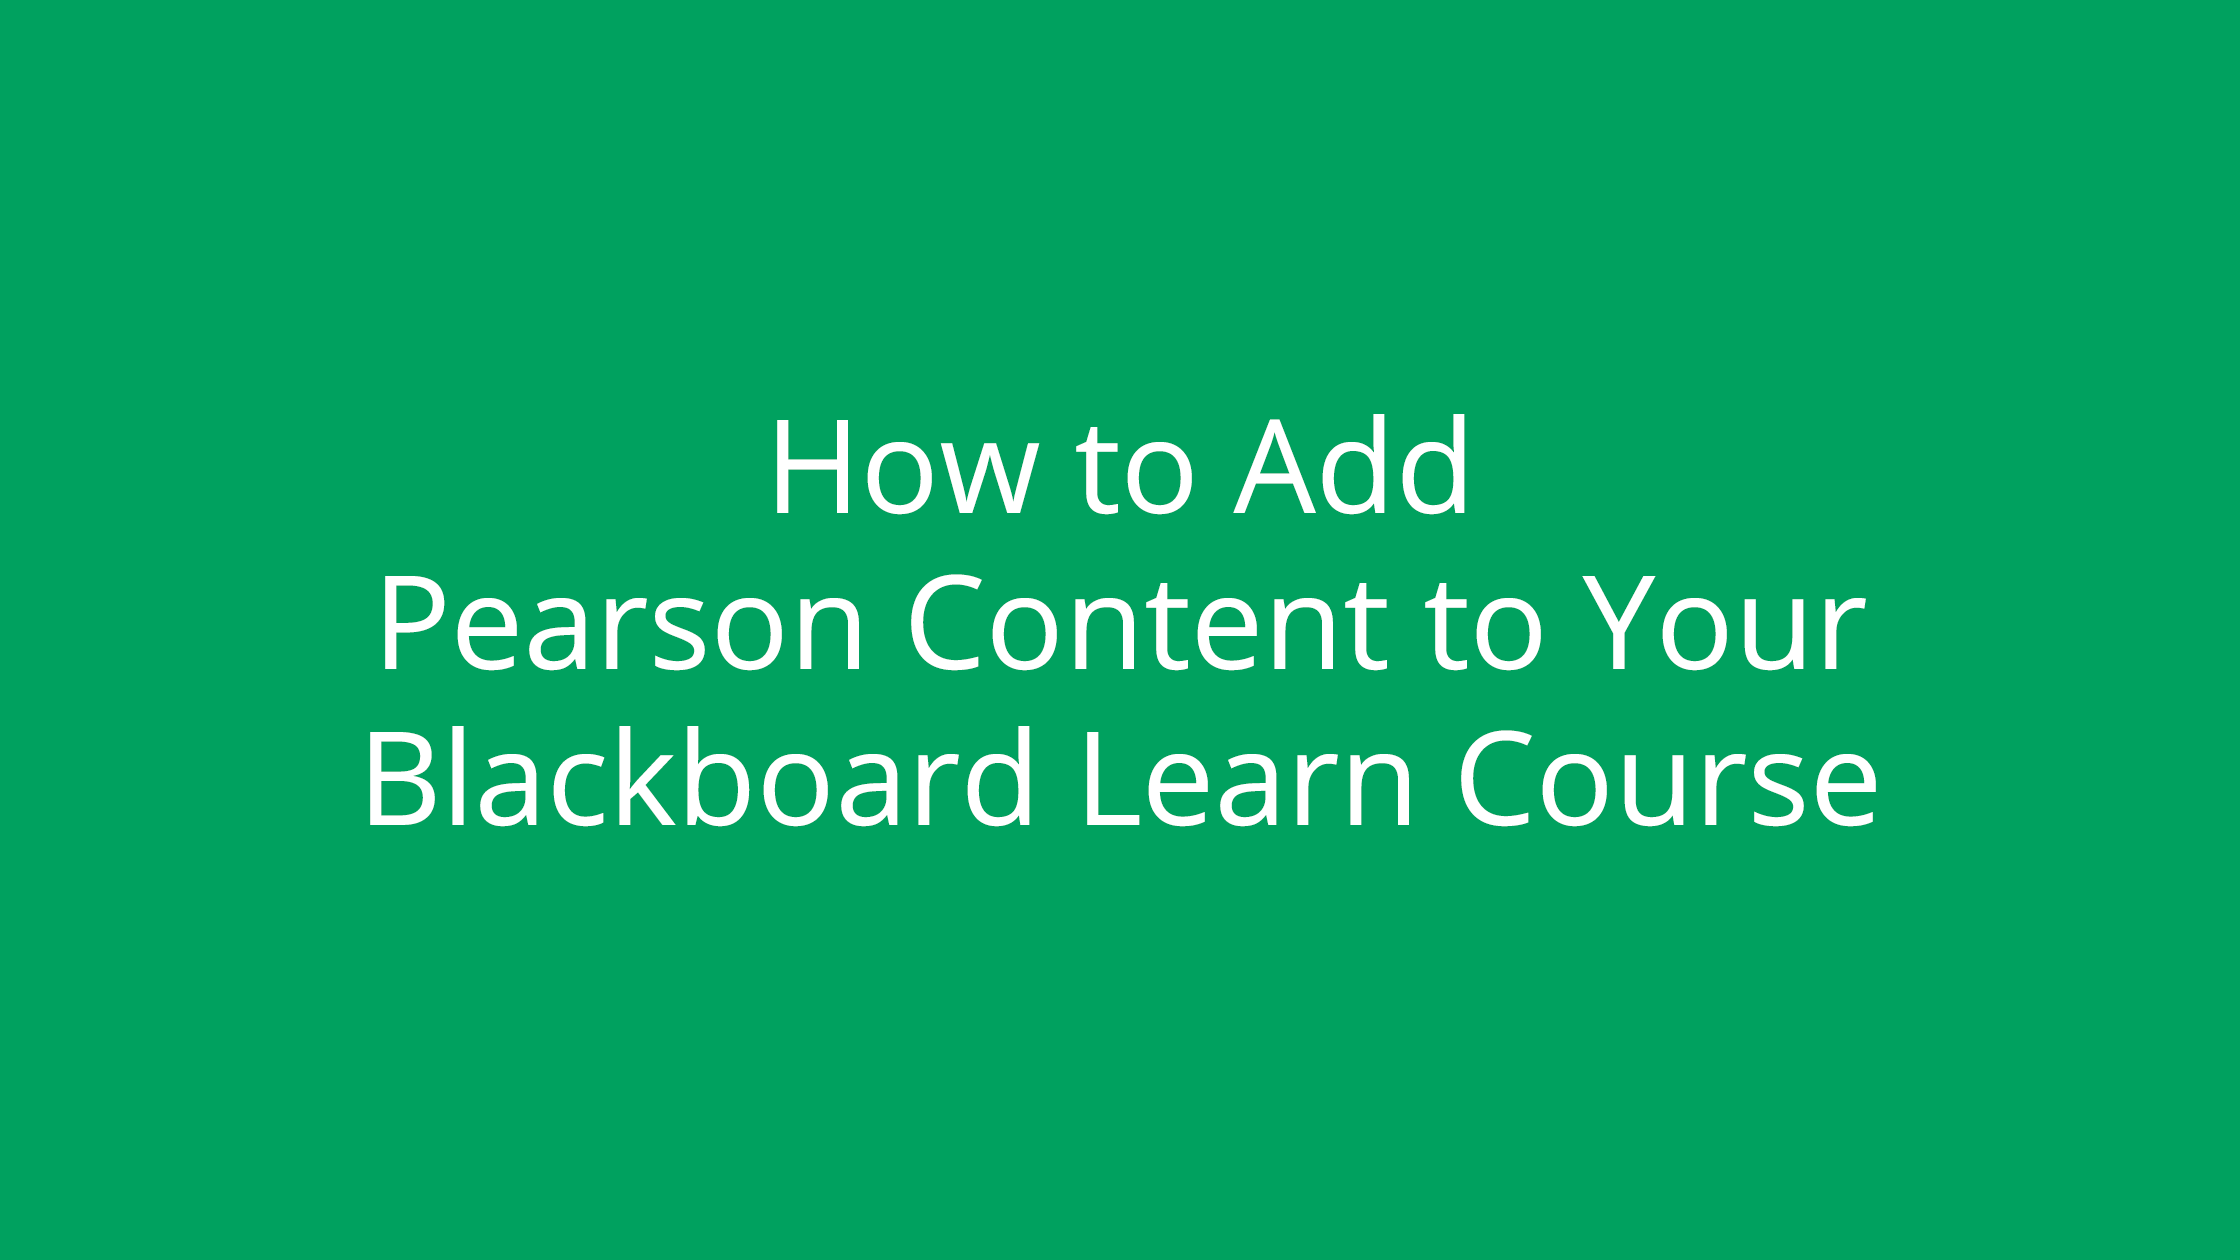 How To Add Pearson Content to your Blackboard Learn Course